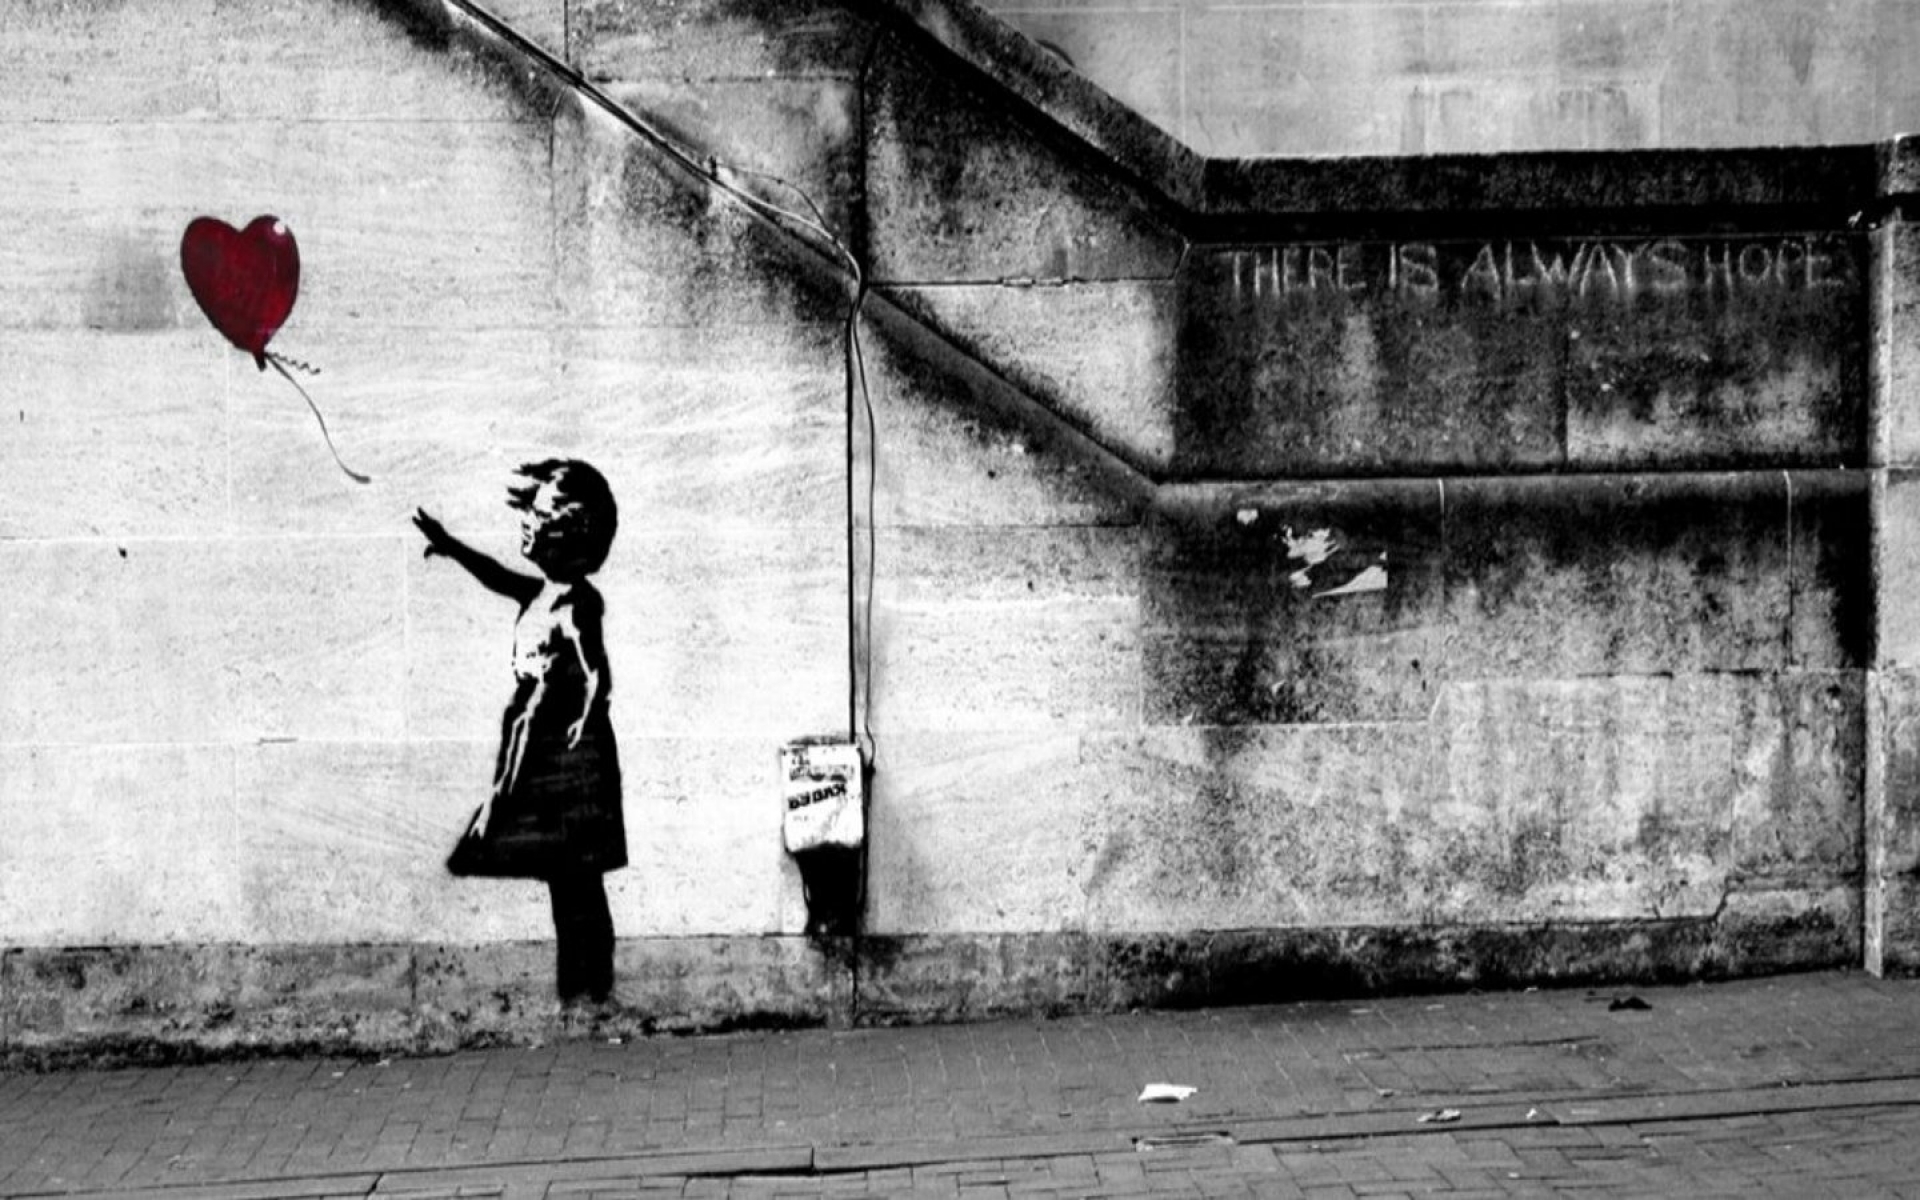 There is always hope! by Banksy